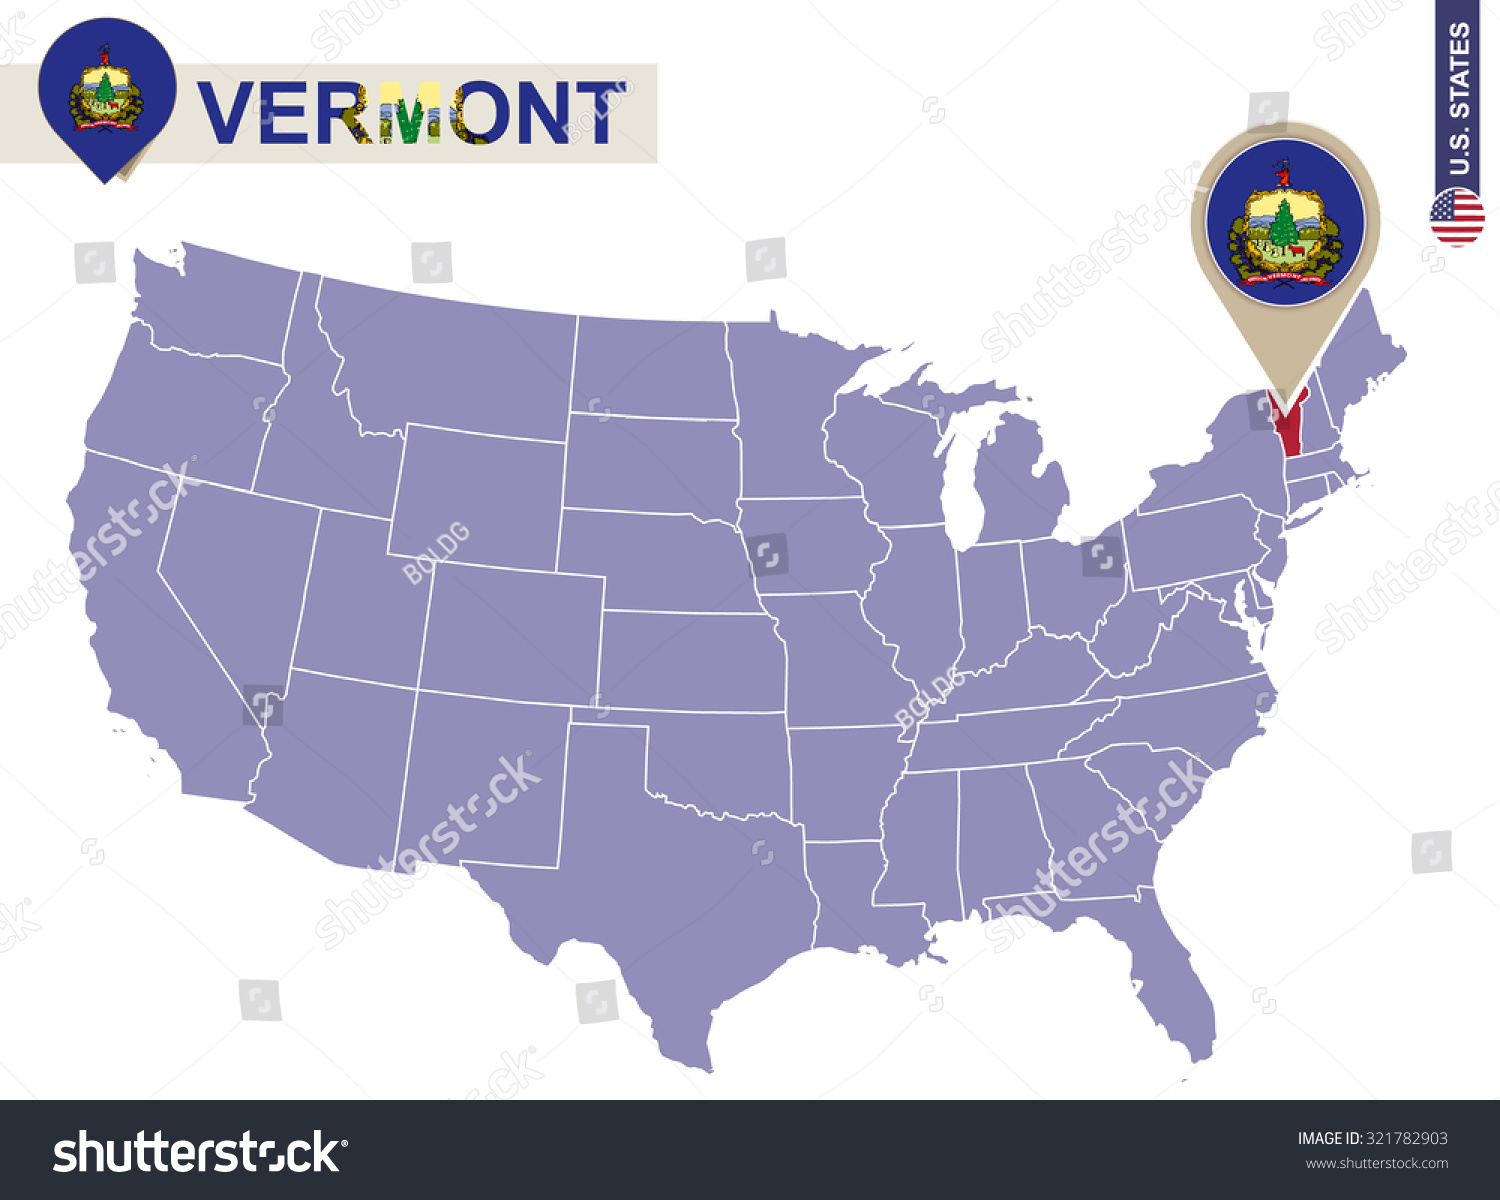 Vermont State On Usa Map Vermont Stock Vector Royalty Free 321782903